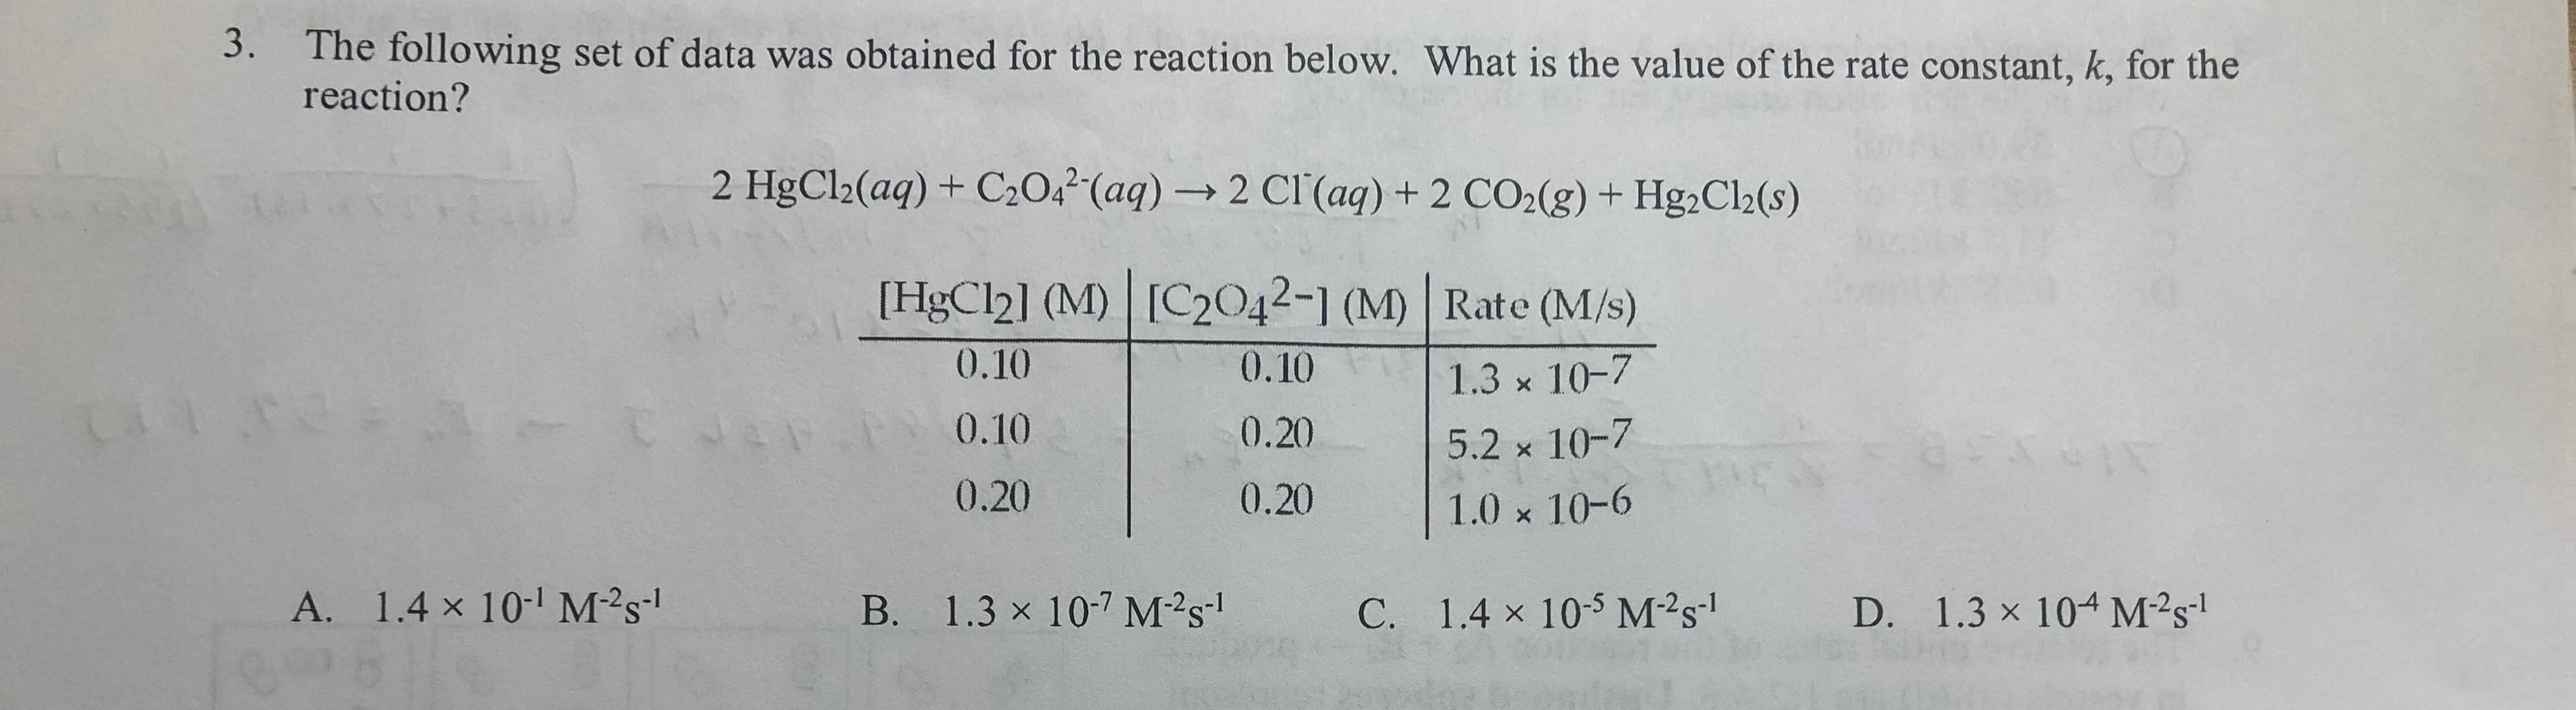 3. The following set of data was obtained for the reaction below. What is the value of the rate constant, k, for the
reaction?
2 HgCl2(aq) + C204²'(aq) → 2 Cl'(aq) + 2 CO2(g) + Hg,Cl2(s)
[HgCl2] (M) [C2042-1 (M) | Rate (M/s)
0.10
0.10
1.3 x 10-7
0.10
0.20
5.2 x 10-7
0.20
0.20
1.0 x 10-6
A. 1.4 x 10- M²s'
B. 1.3 x 107 M²s!
C. 1.4 x 10-5 M²s'
D. 1.3 x 104 M²s'
